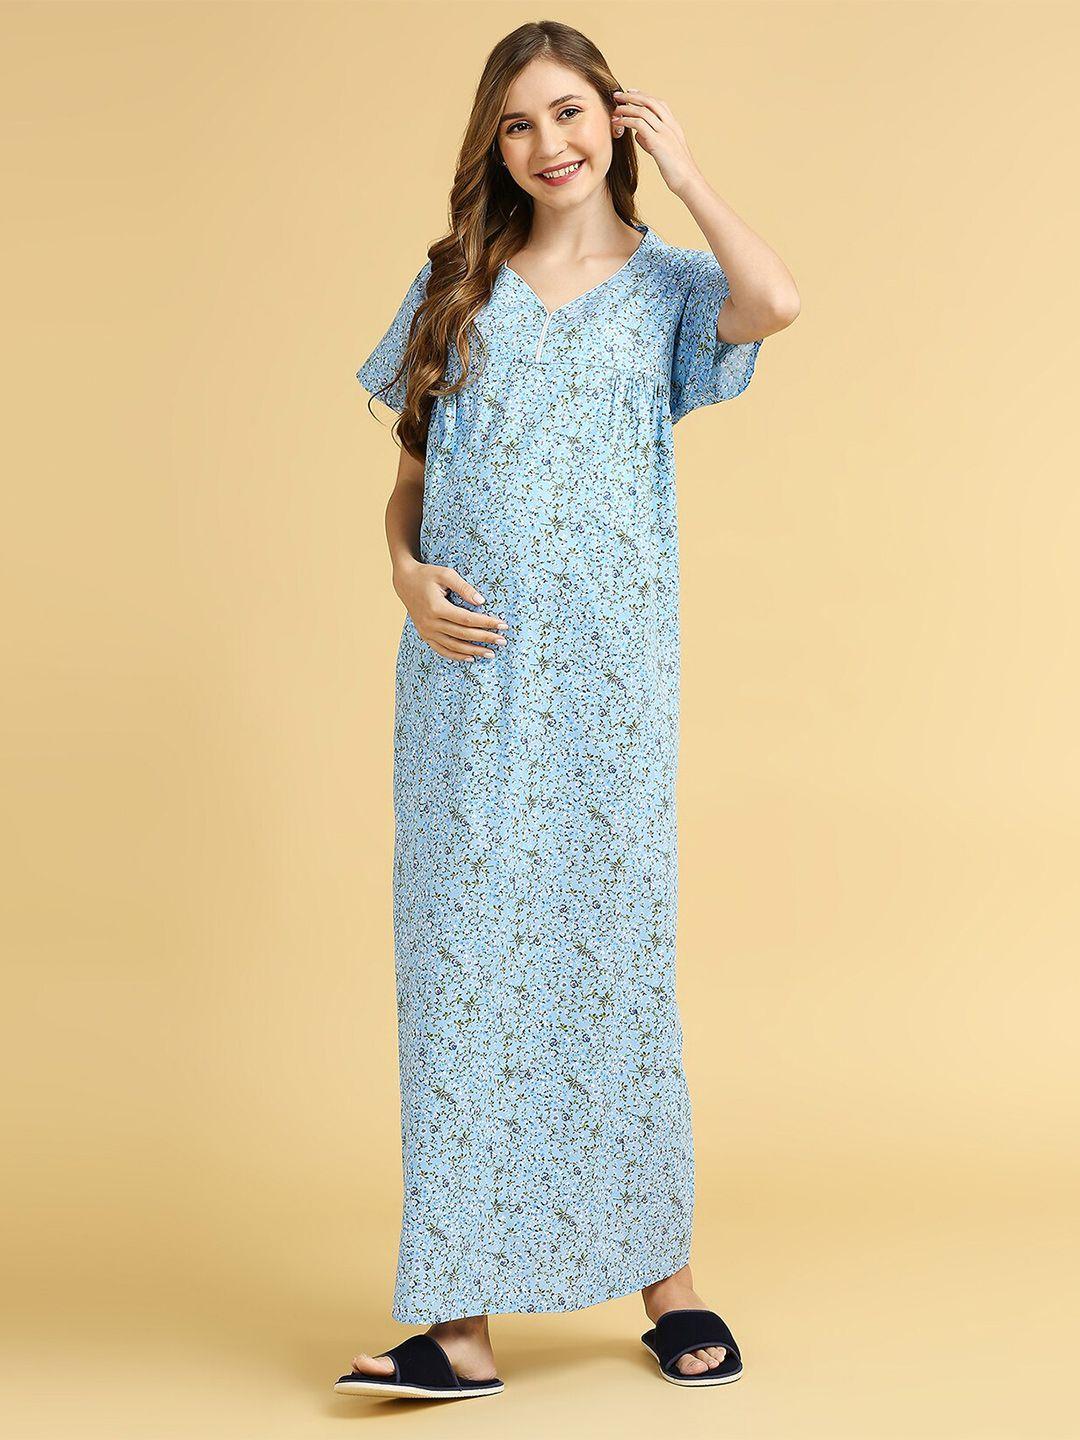 momtobe floral printed maxi maternity nightdress